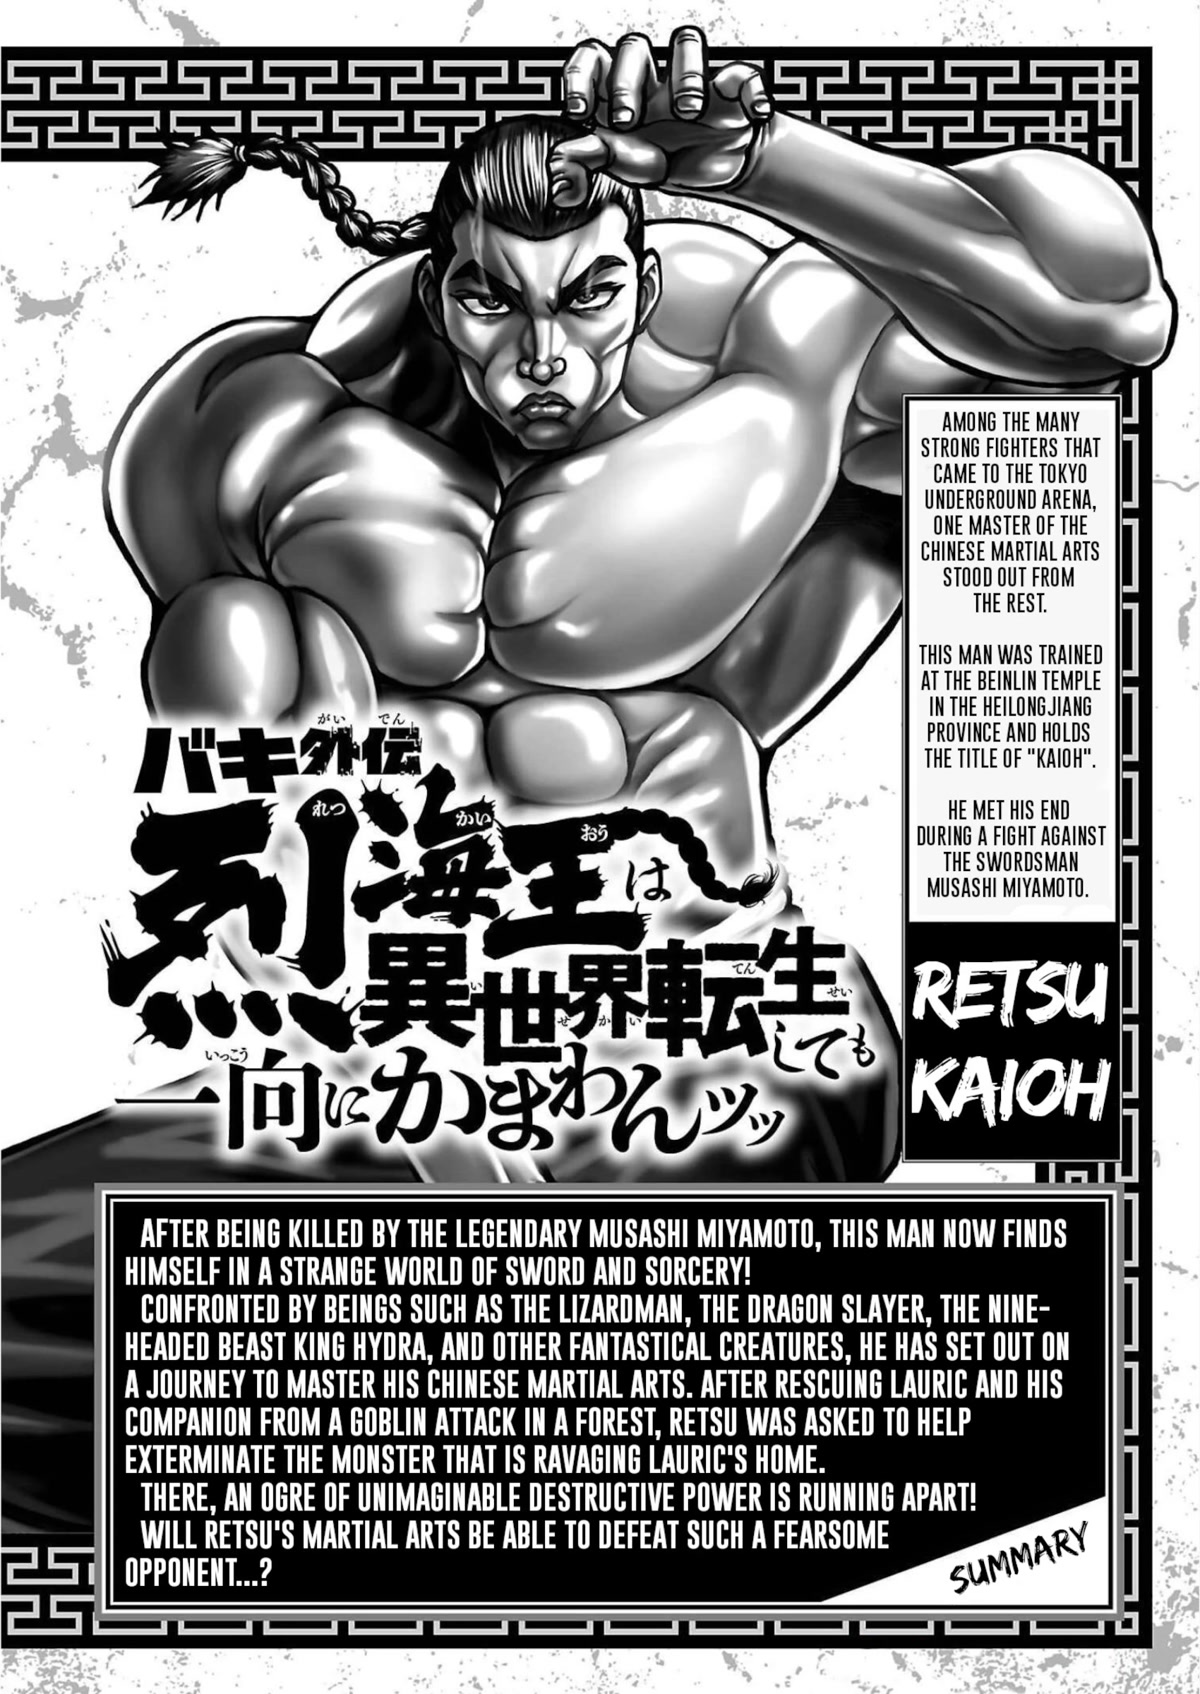 Baki Side Story - Retsu Kaioh Doesn't Mind Even If It's In Another World - chapter 25 - #4